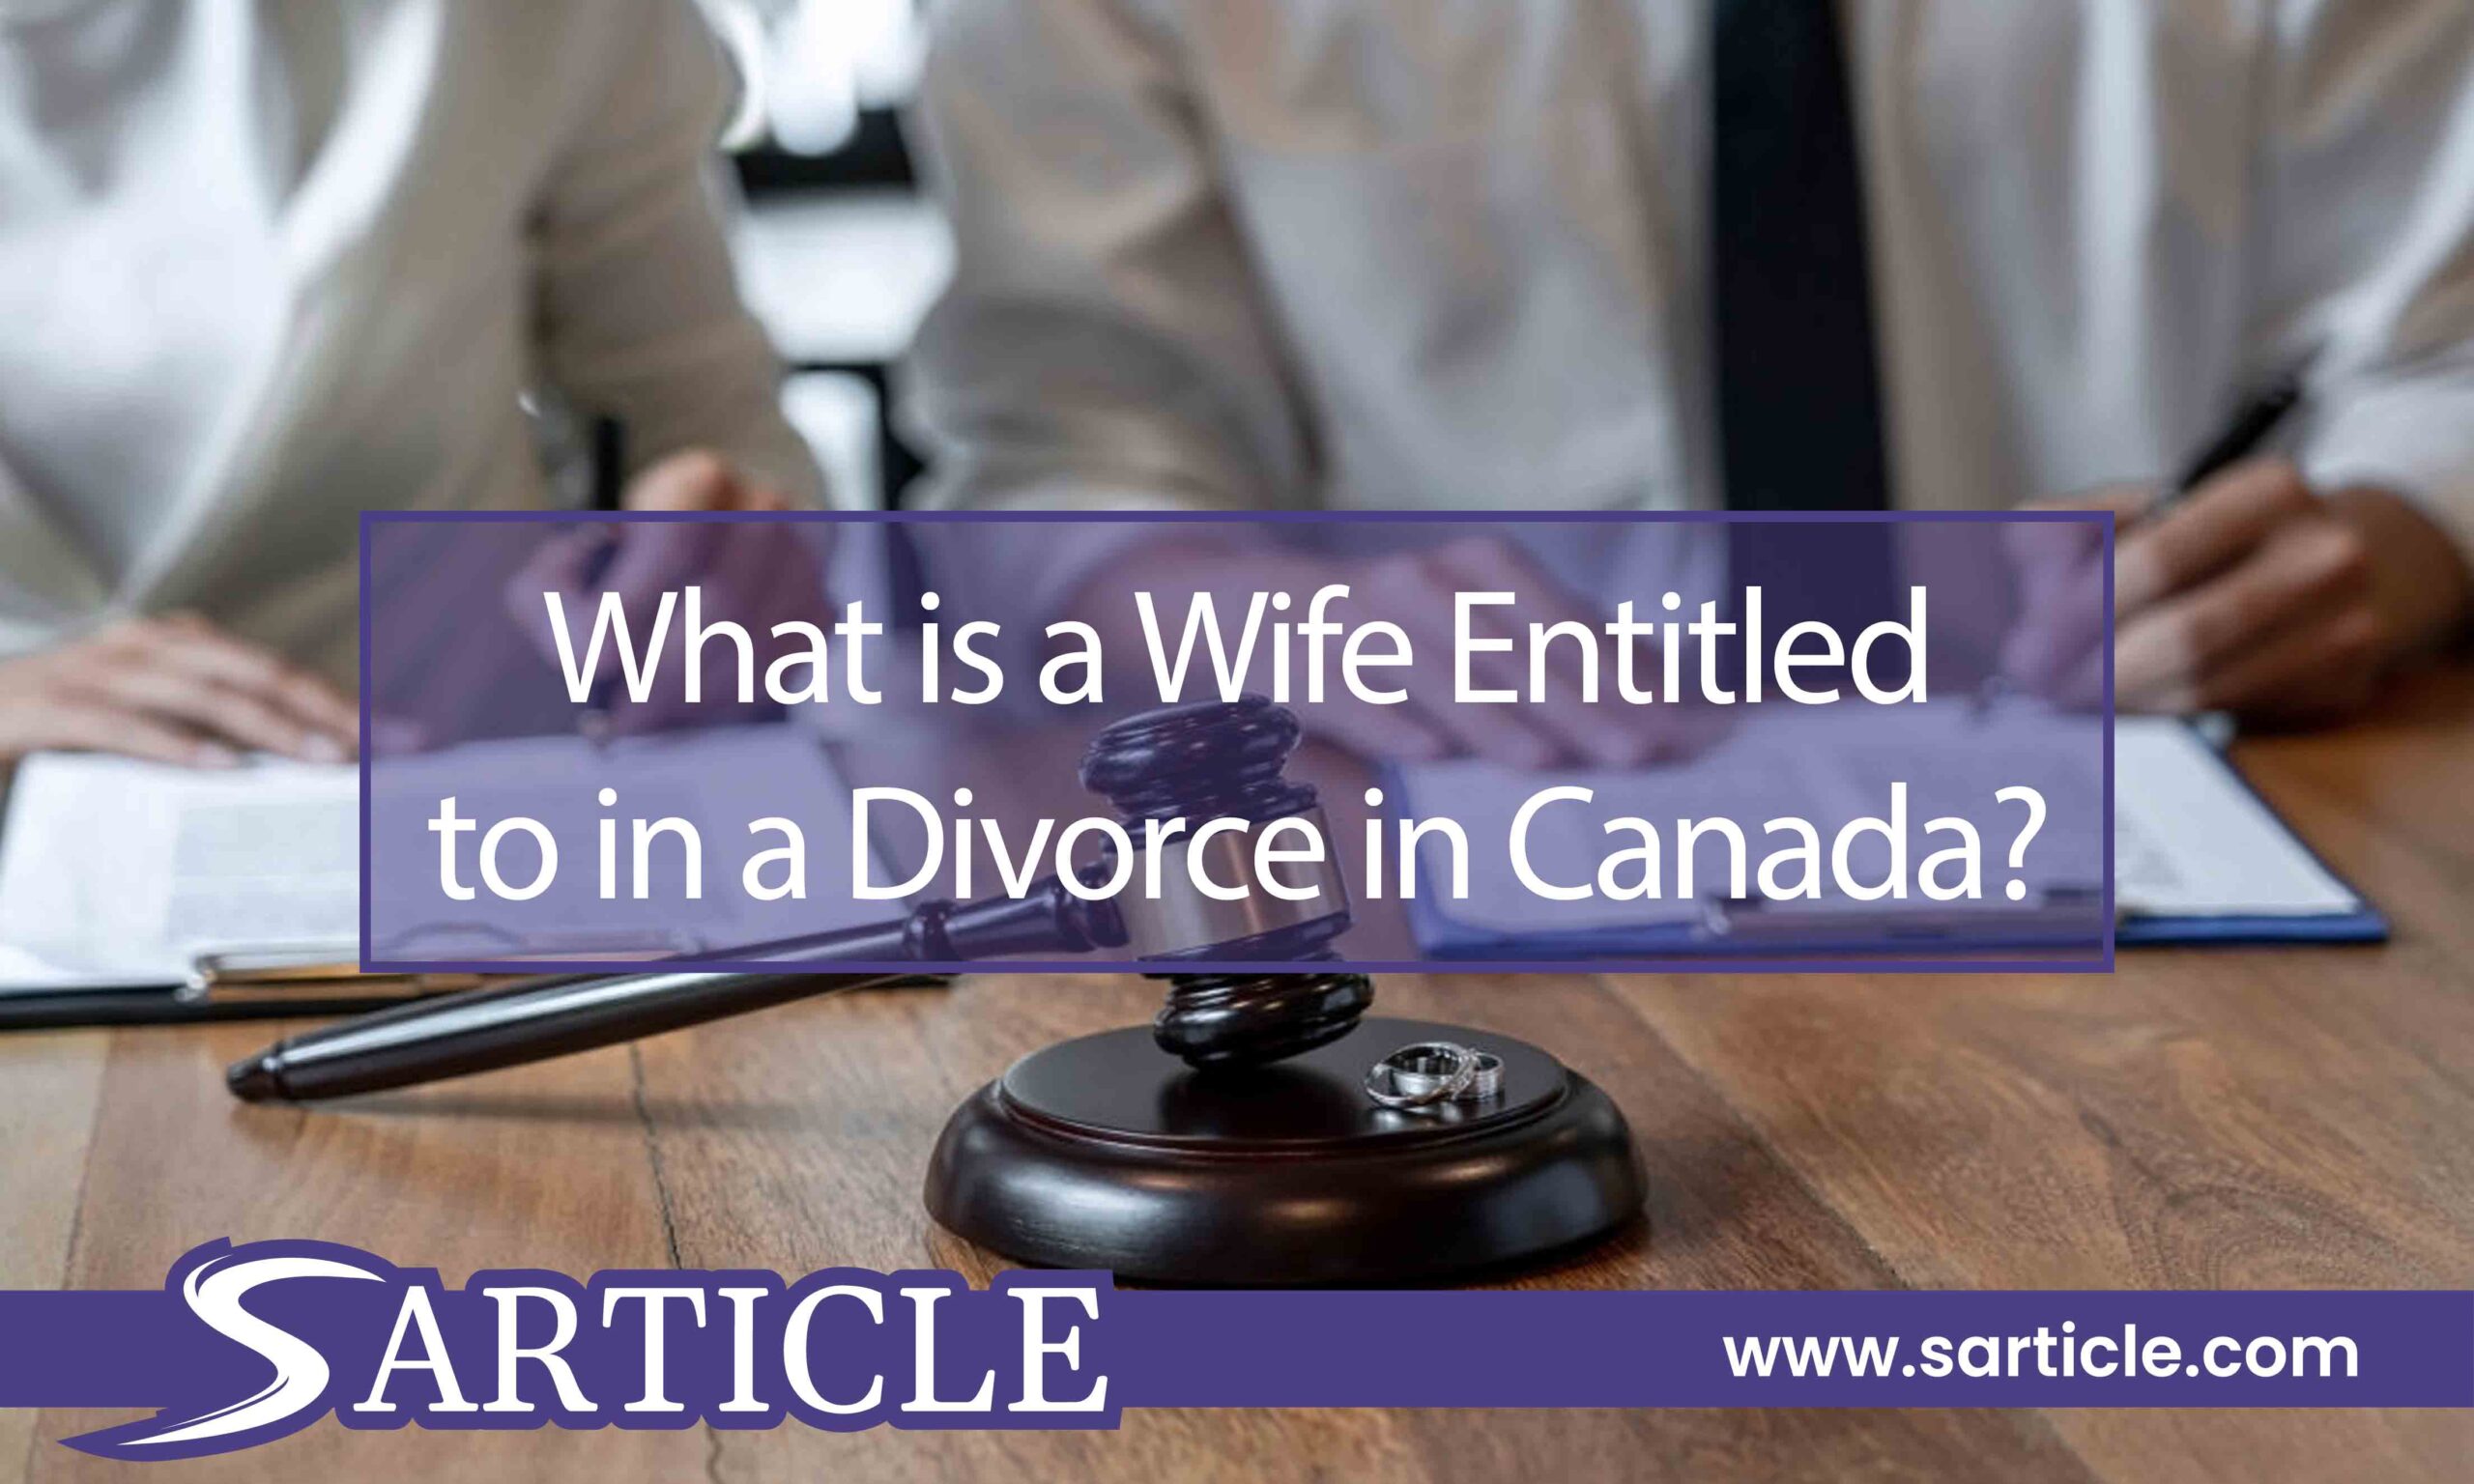 What is a Wife Entitled to in a Divorce in Canada?